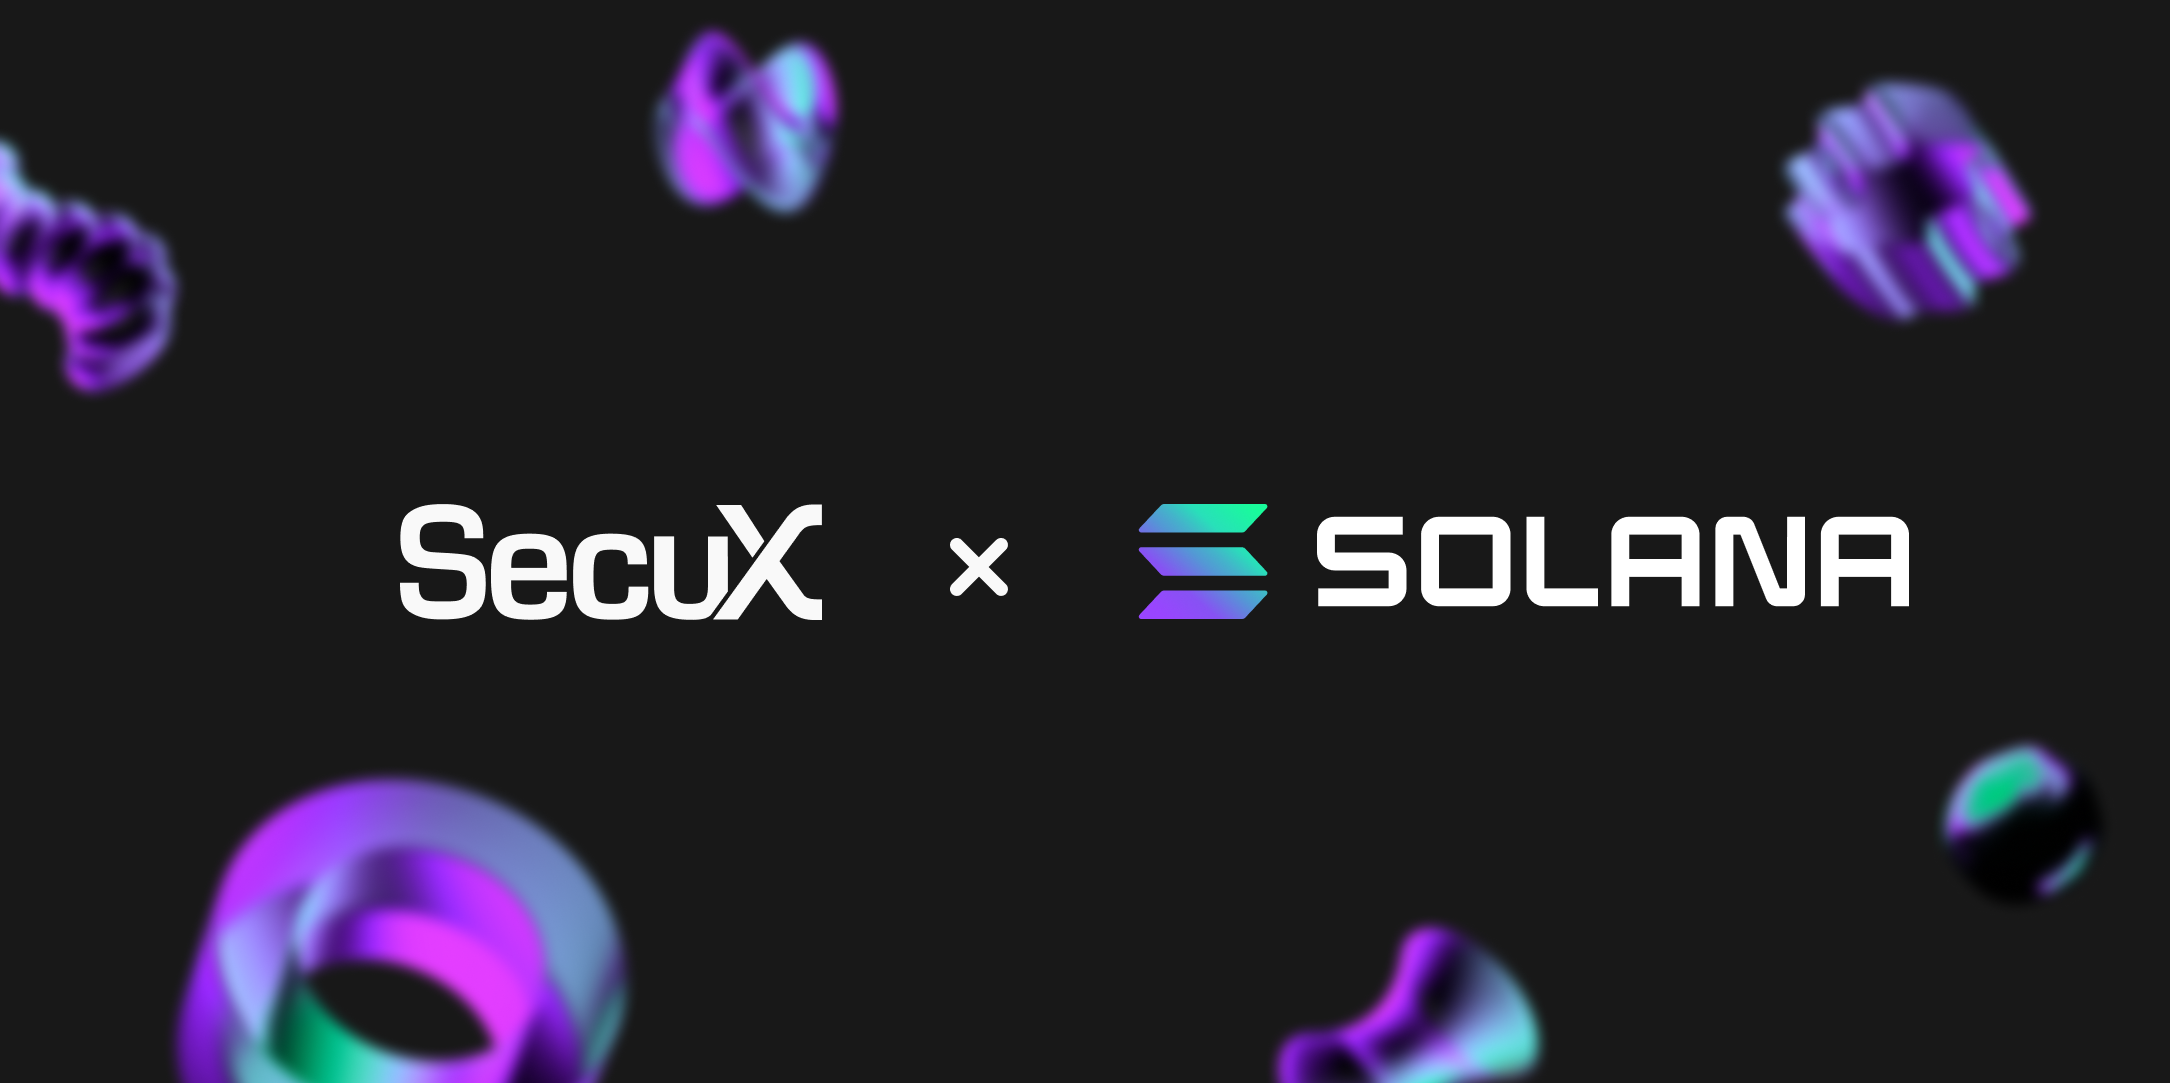 SecuX Crypto Hardware Wallets Now Support the Solana Ecosystem!